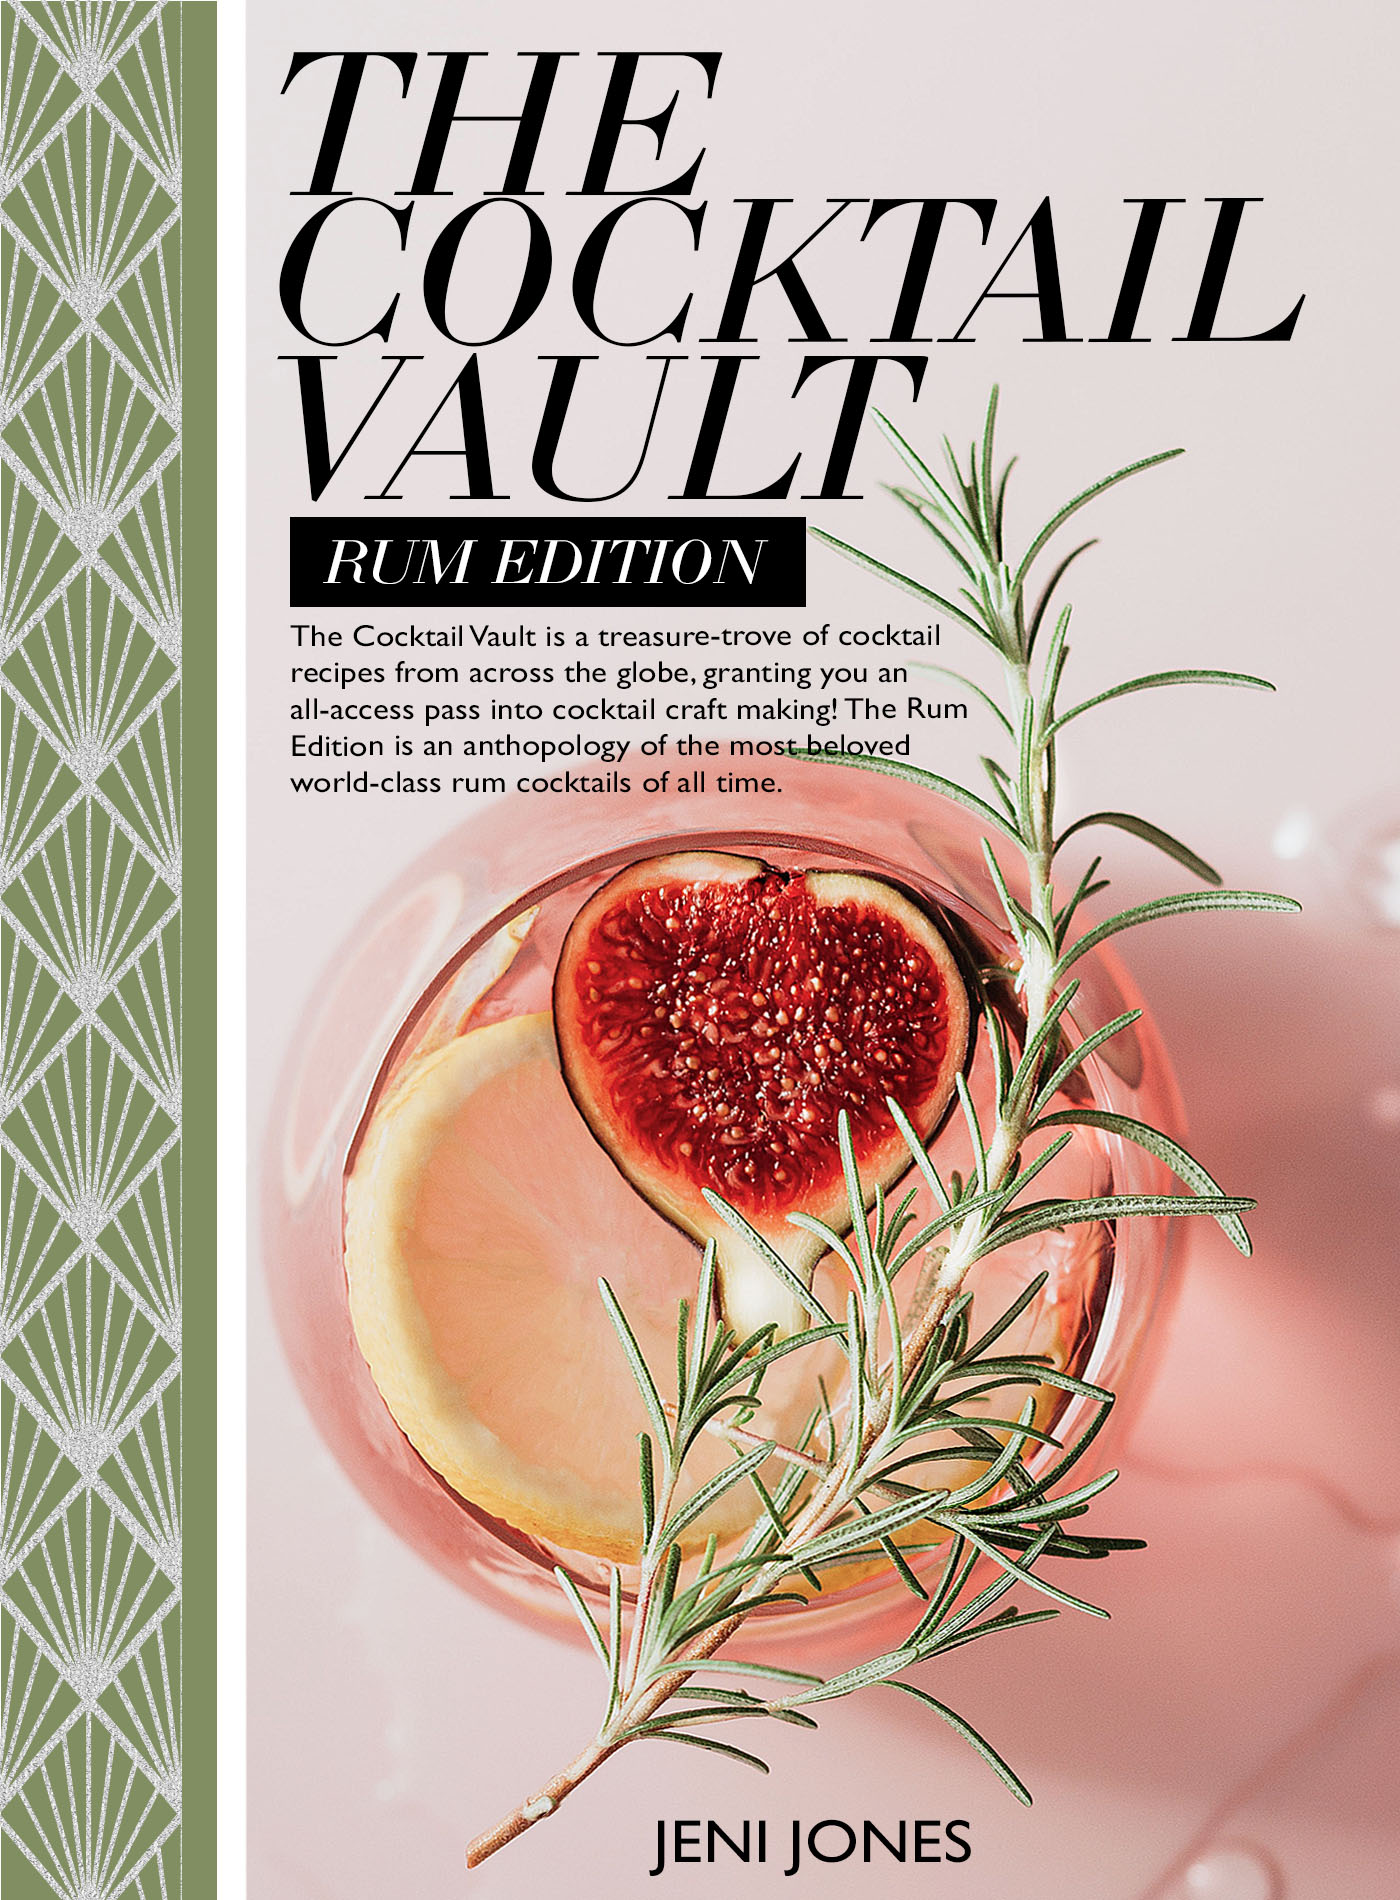 The cocktail vault: Rum Edition - cover image 